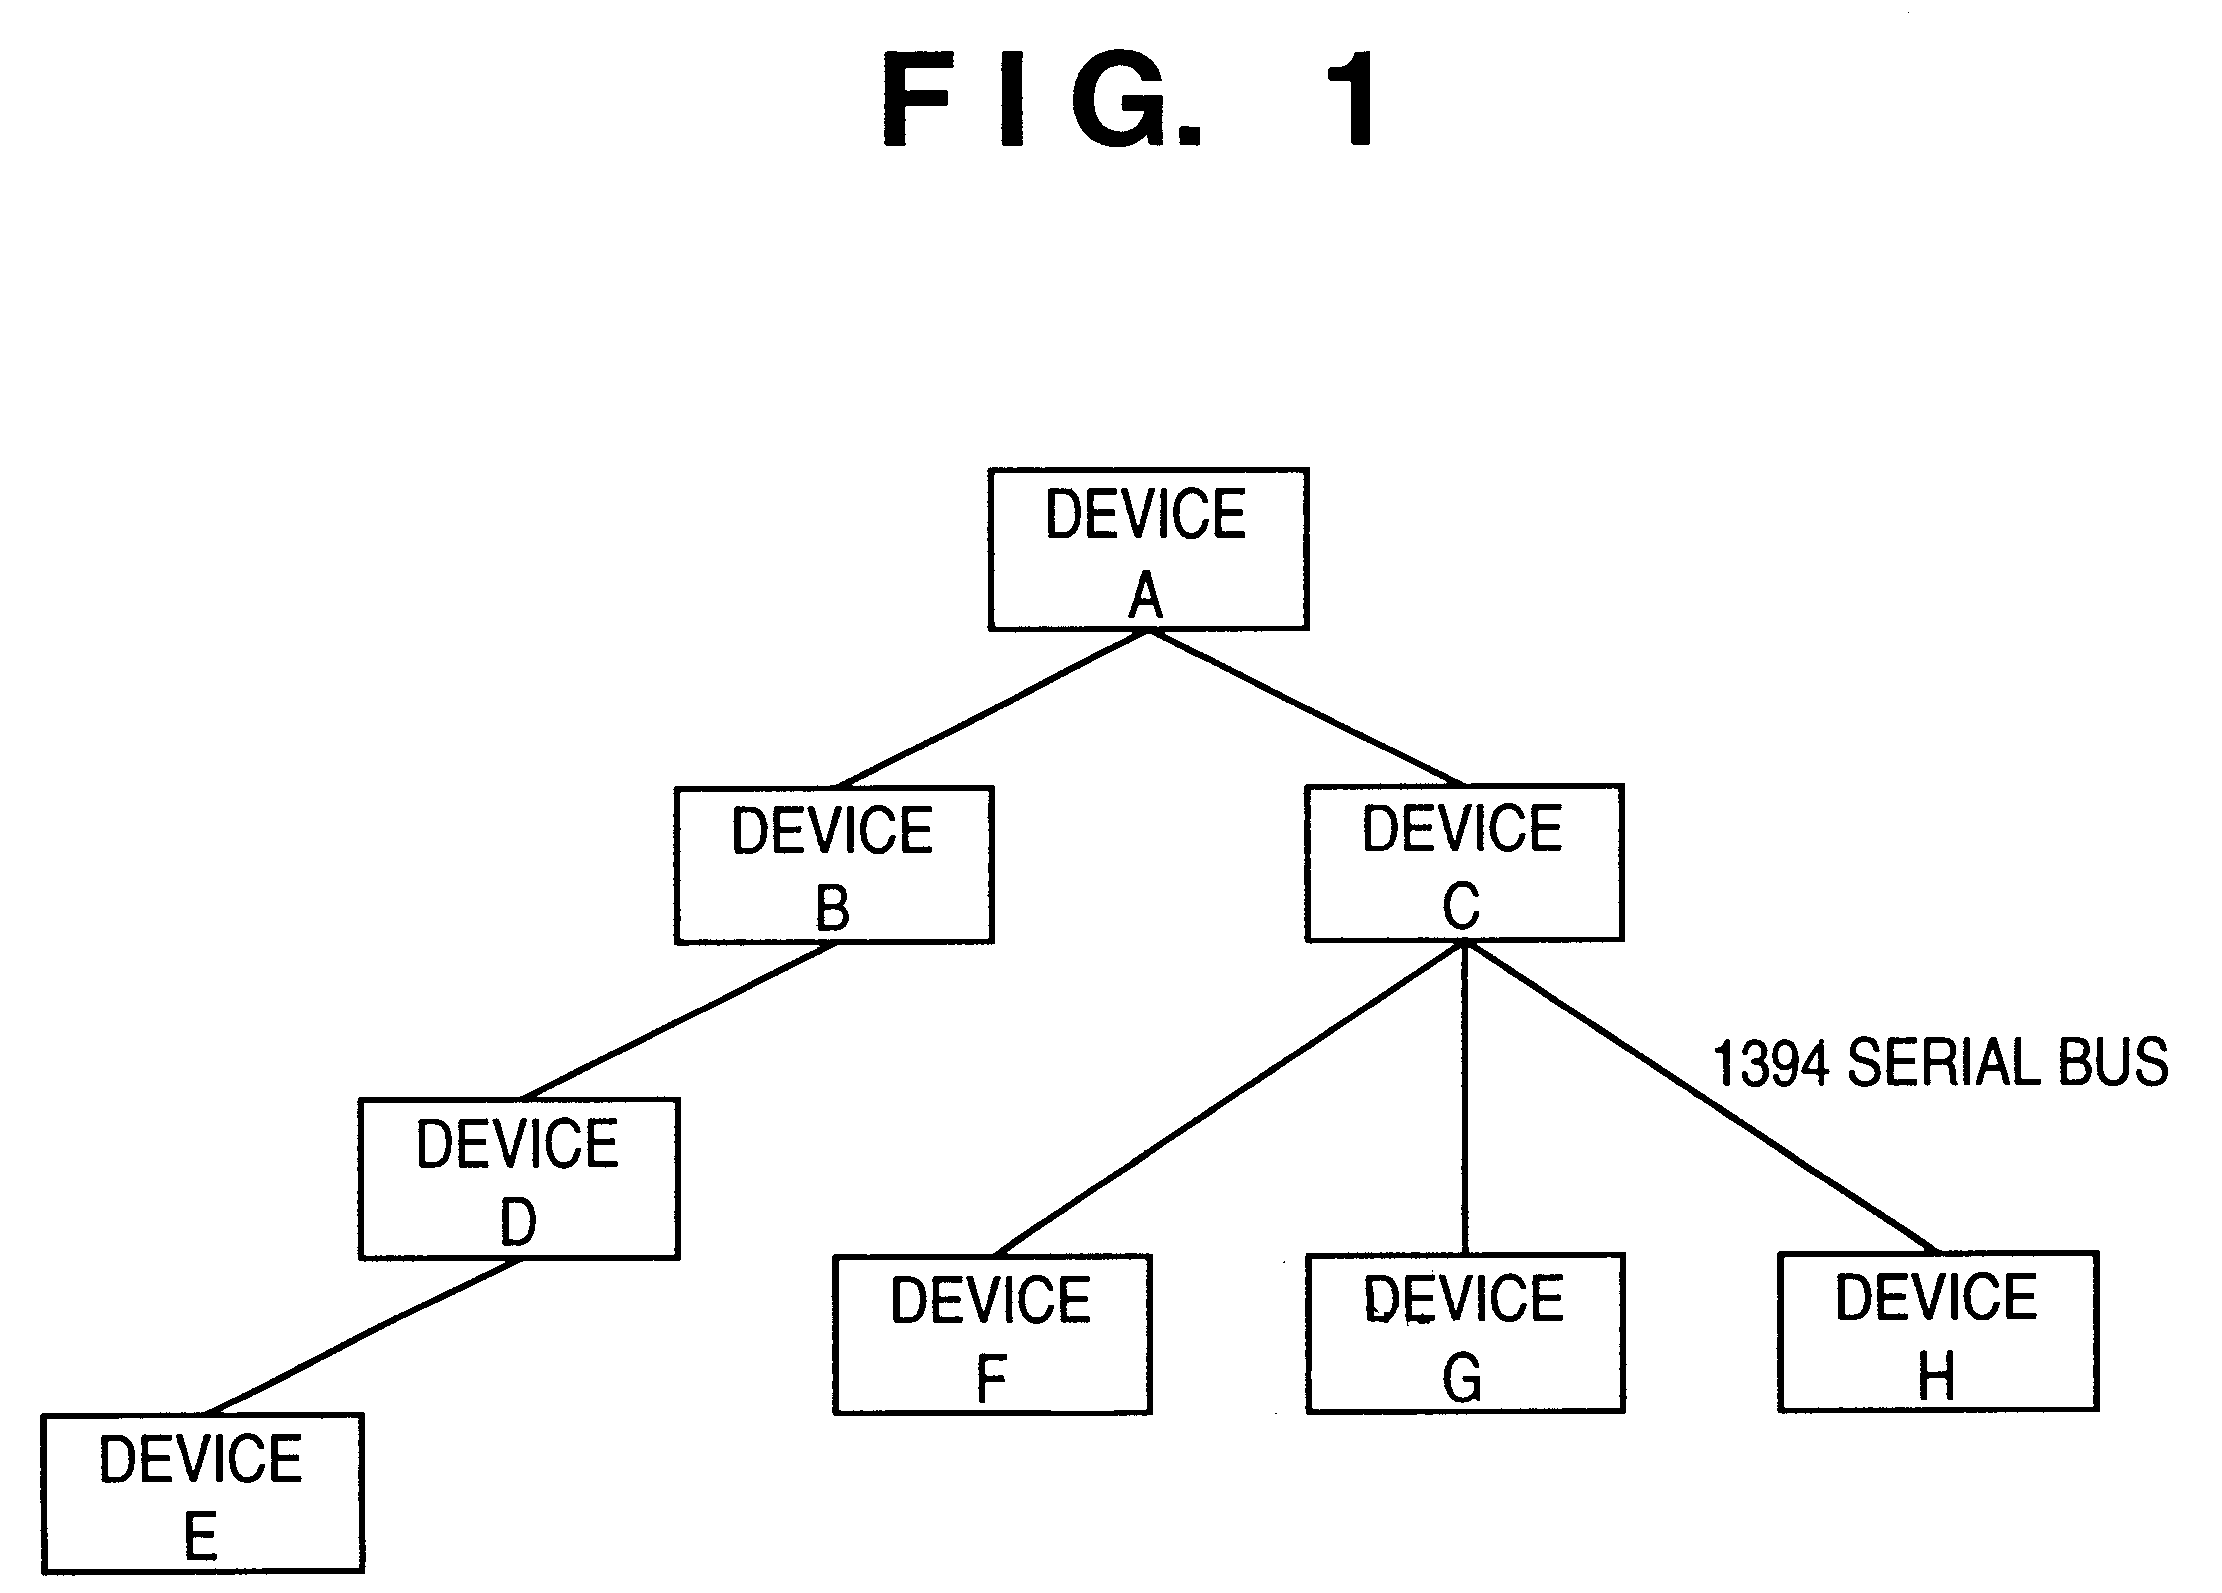 Data communication on a serial bus using an initial protocol executed in a transaction layer